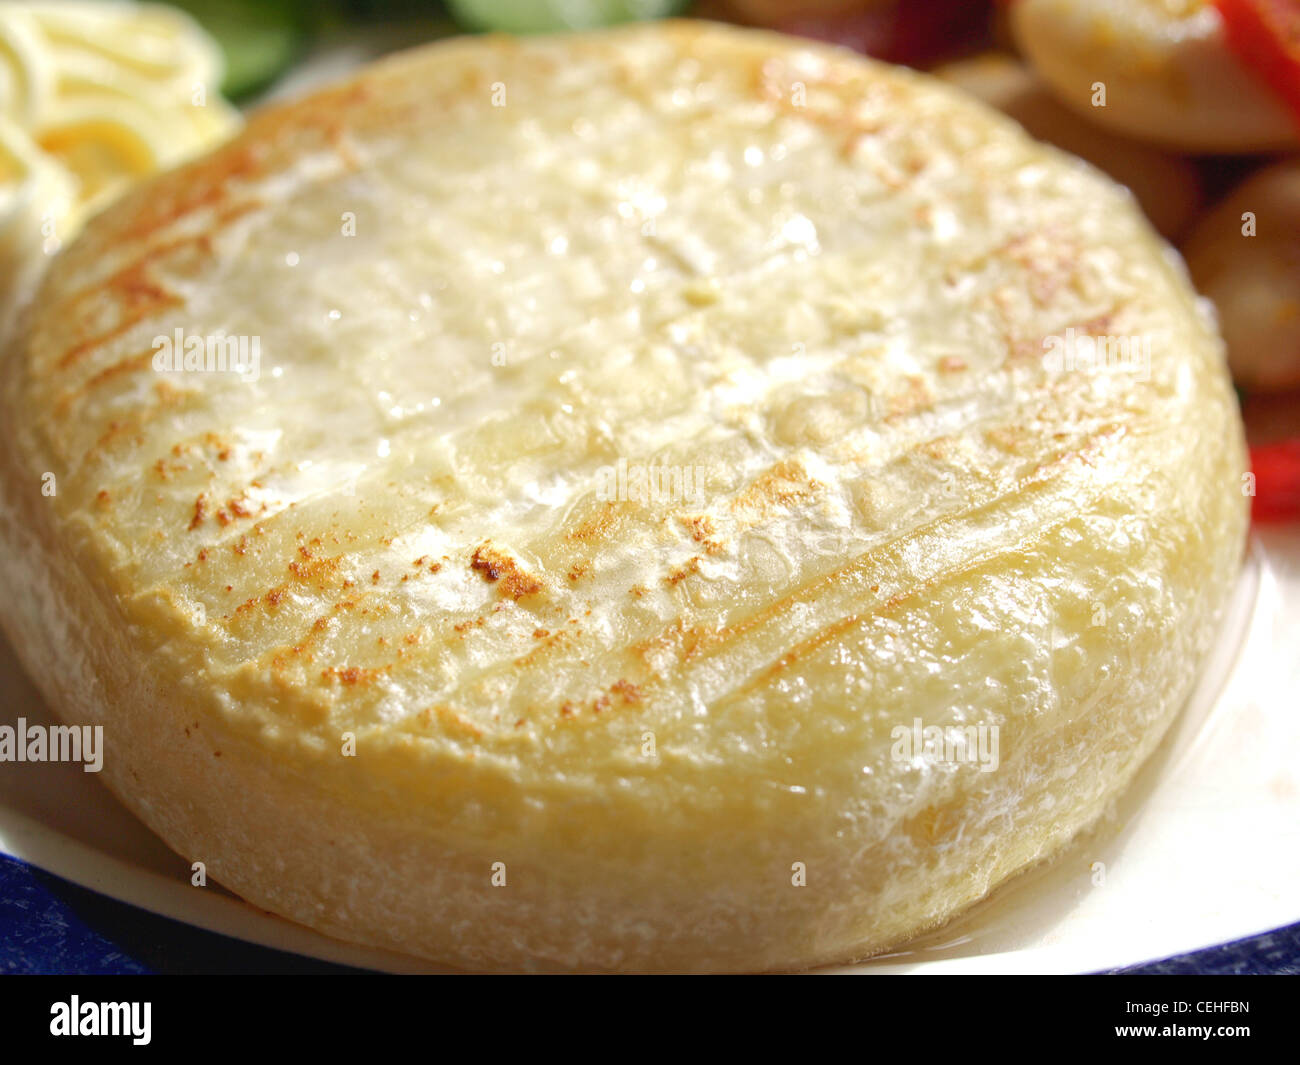 Vegetarian main dish including cheese, mayonnaise, curry beans, peppers and cucumbers Stock Photo